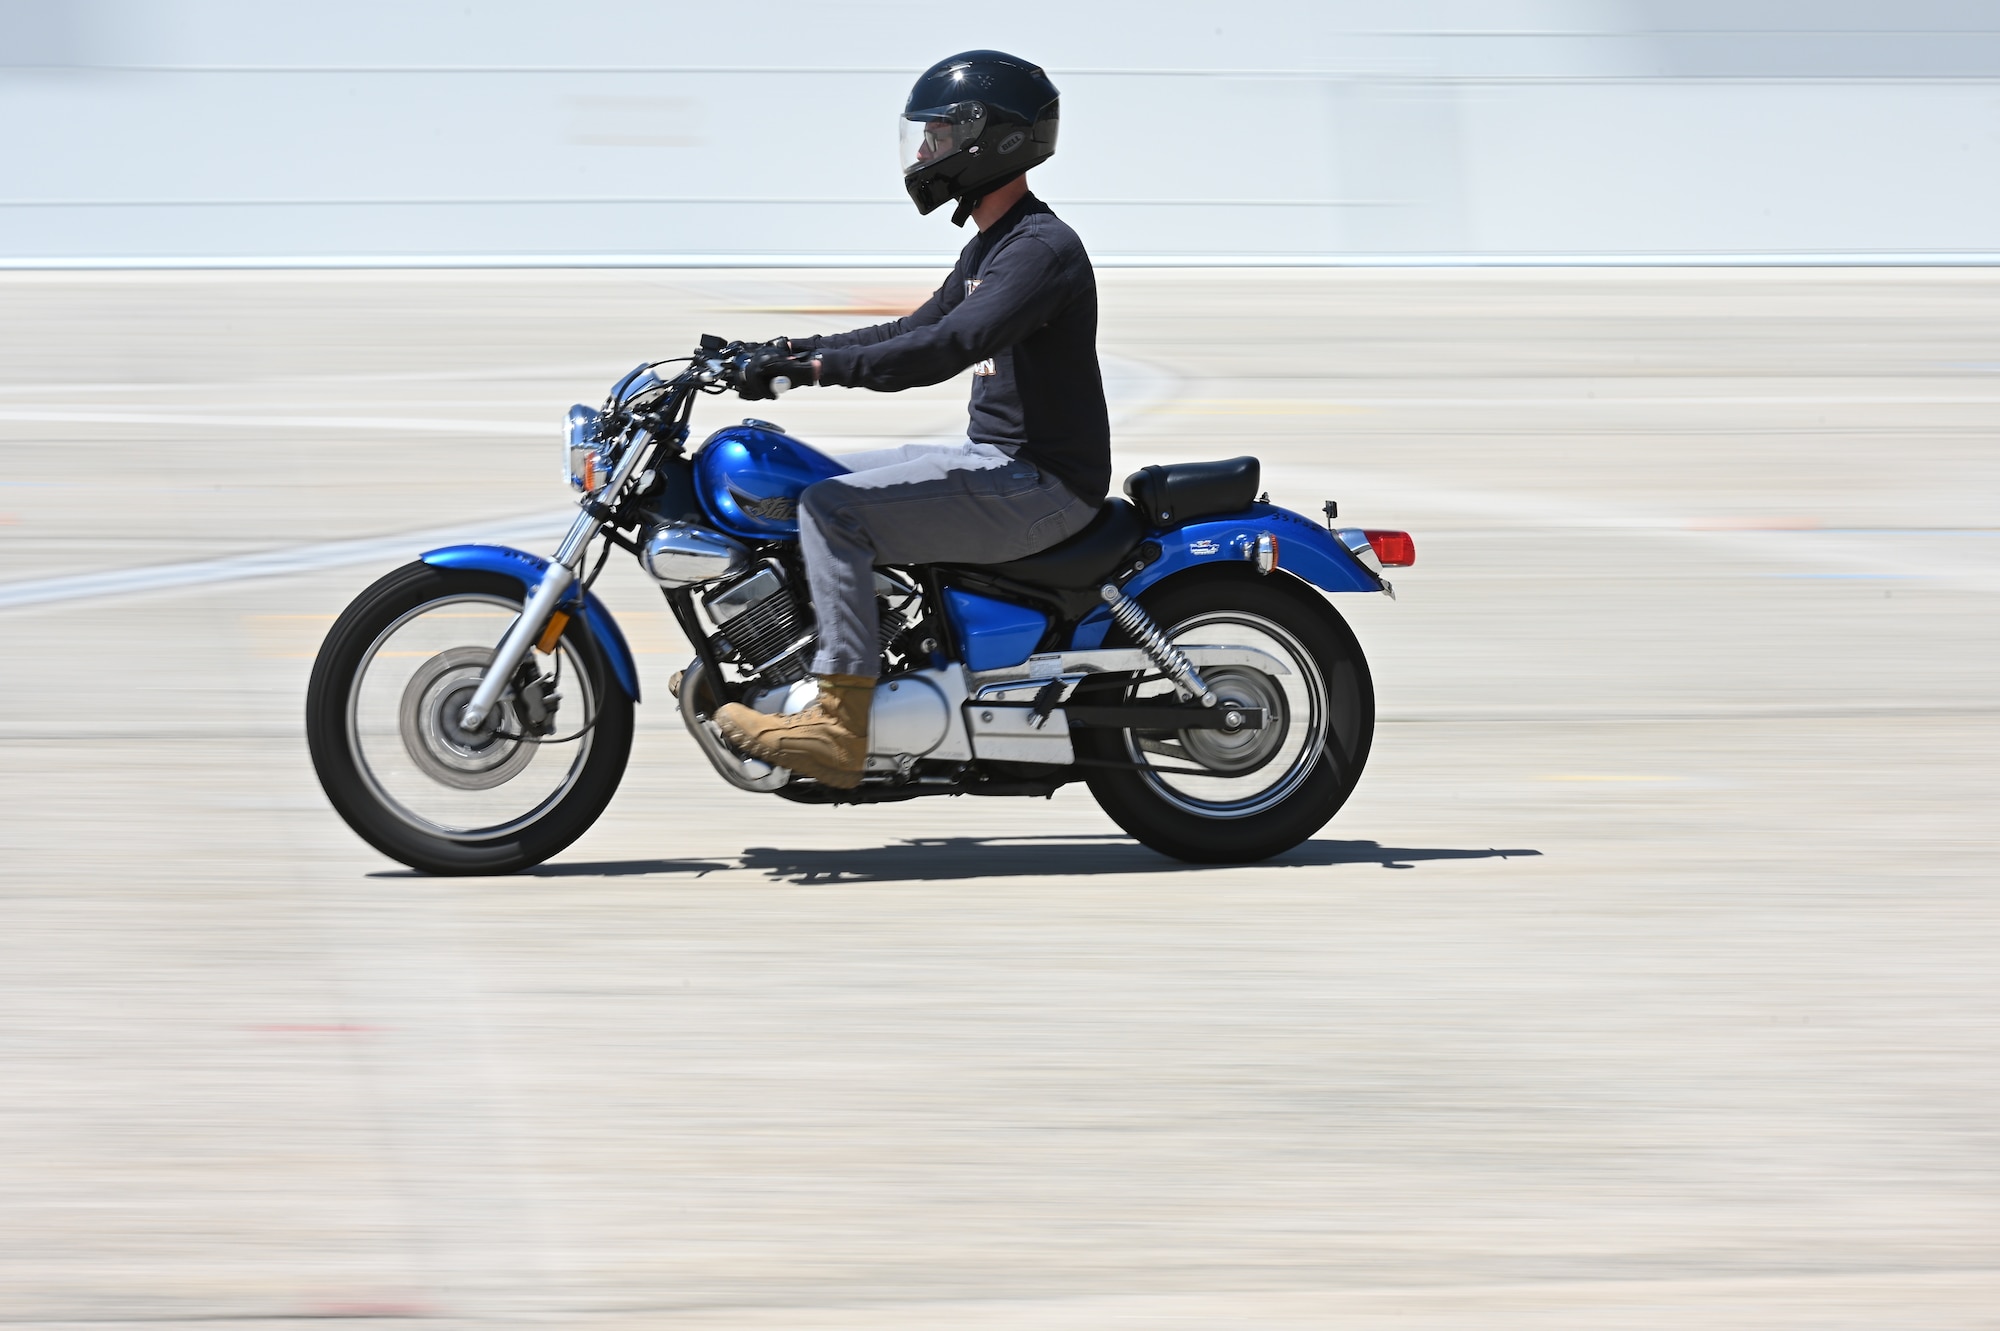 A motorcycle rides on base